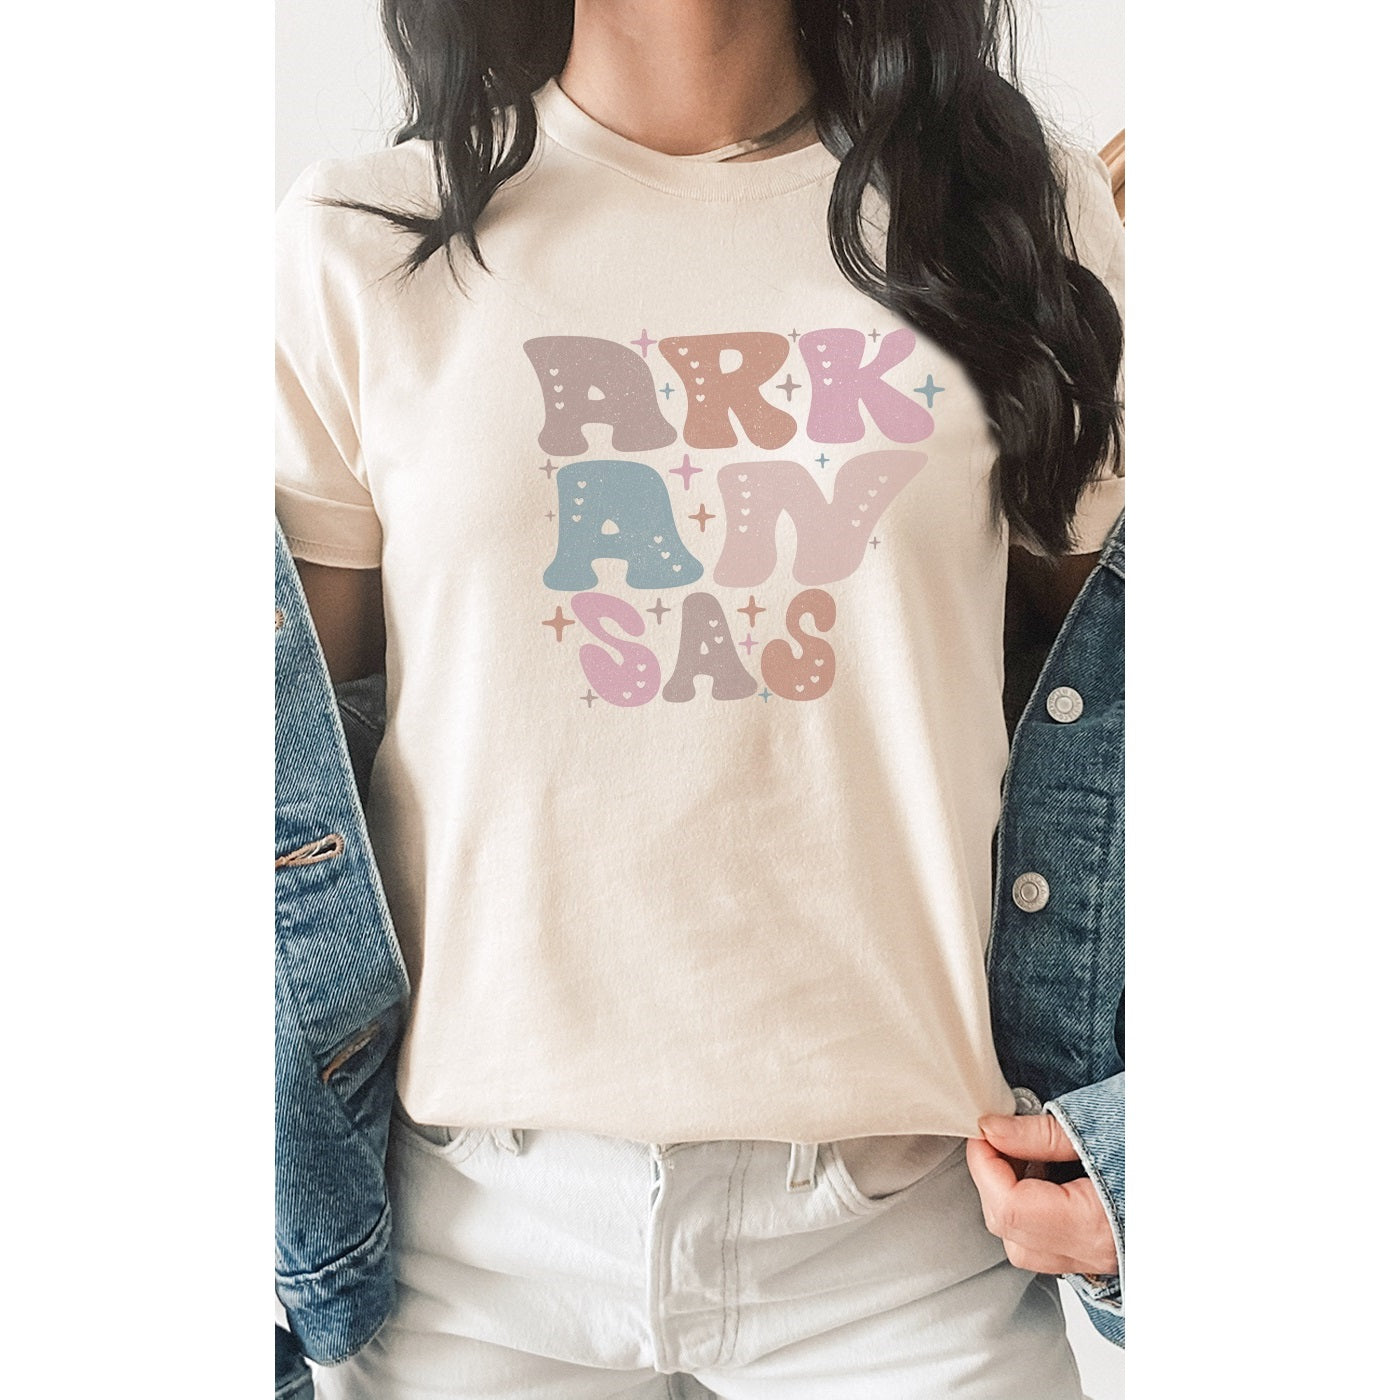 Cream colored unisex fit tee.  The word 'Arkansas' in bubble letters made out to look like the shape of the state of Arkansas. Colors of the design are light pink, dusty light blue, dusty brown, and tan made to look vintage.